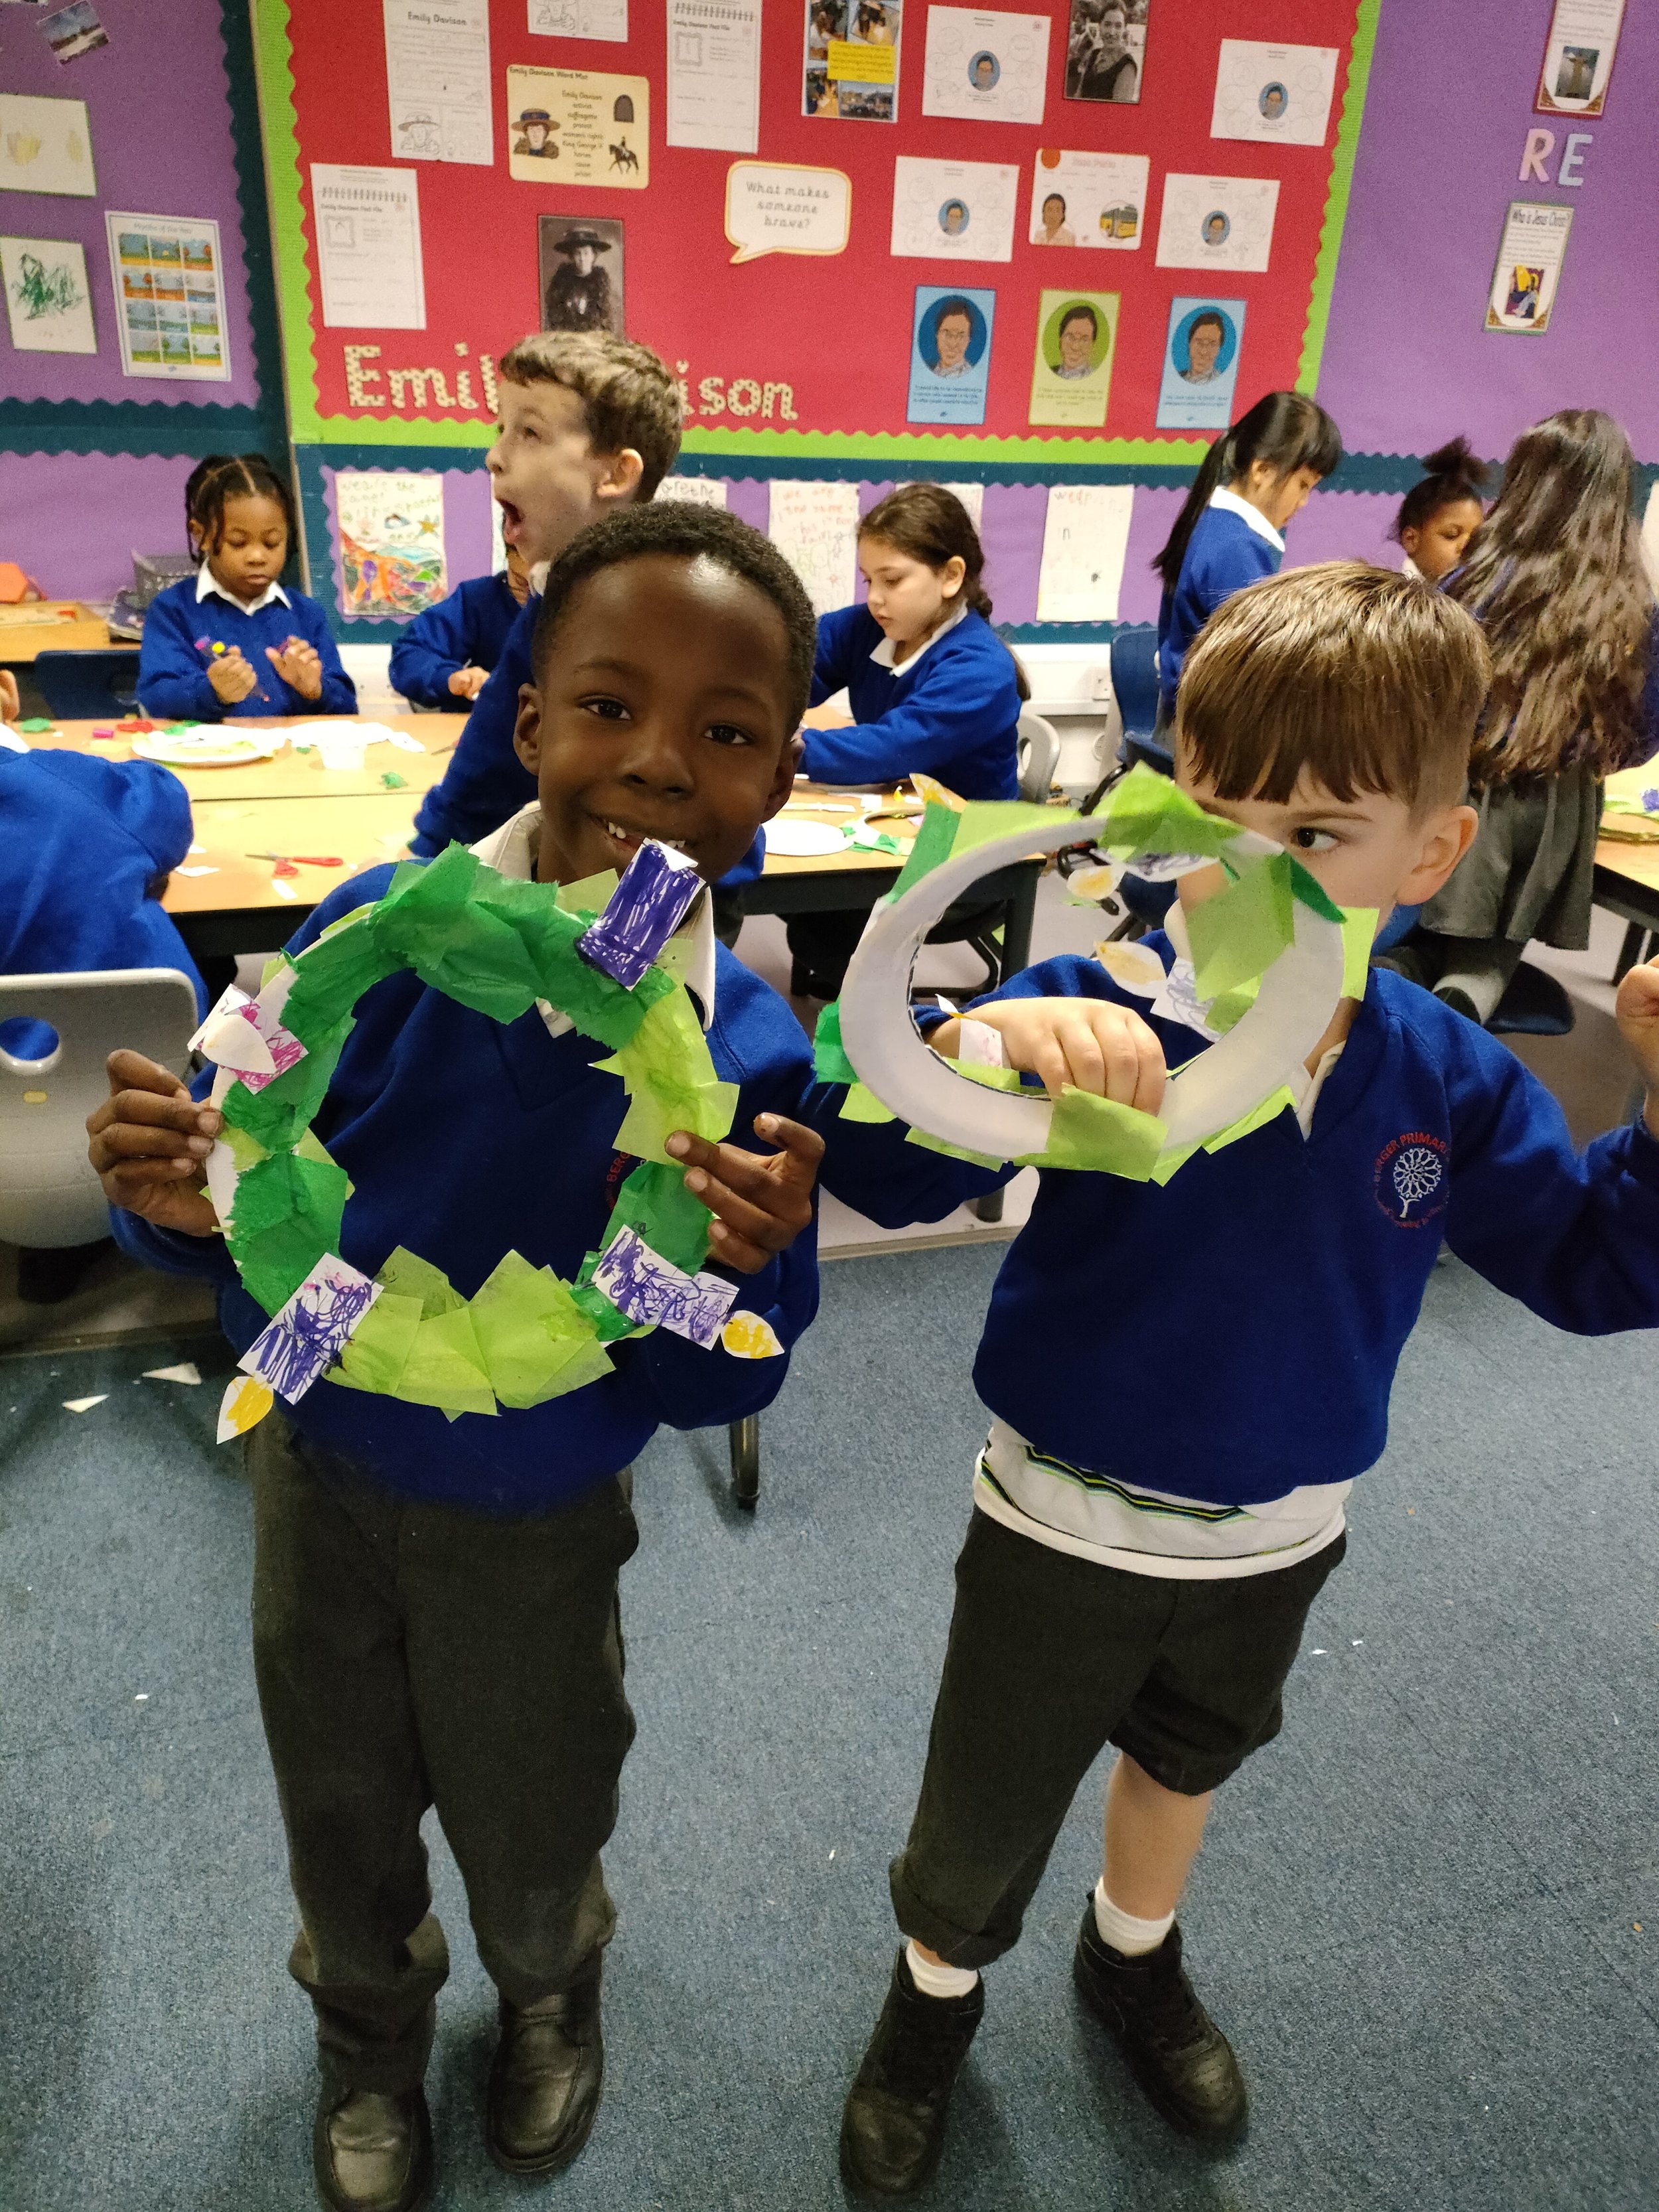 Making advent wreaths in RE.